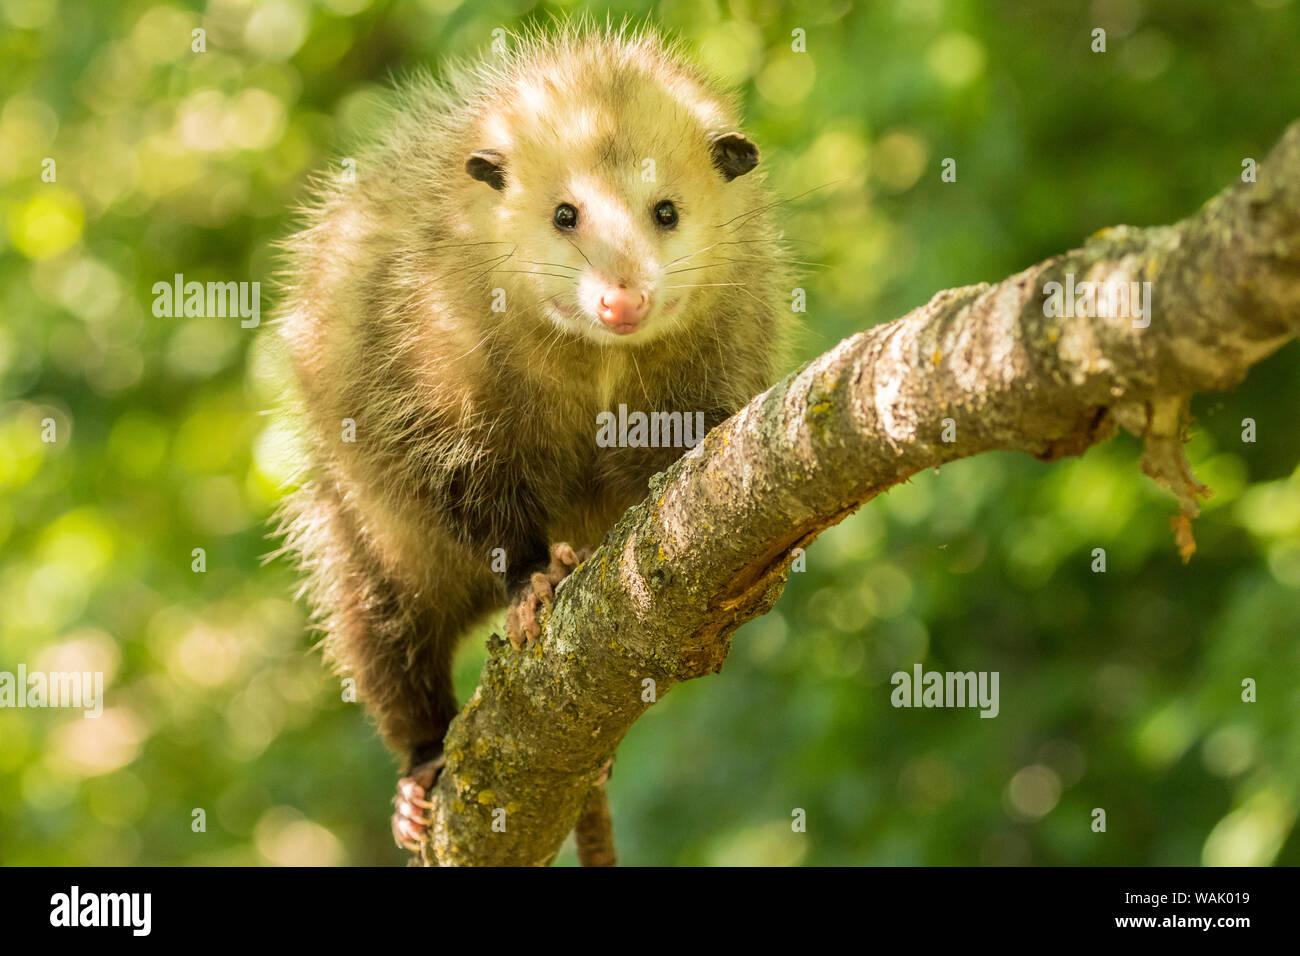 Pine County. Captive adult opossum. Credit as: Cathy and Gordon Illg / Jaynes Gallery / DanitaDelimont.com Stock Photo